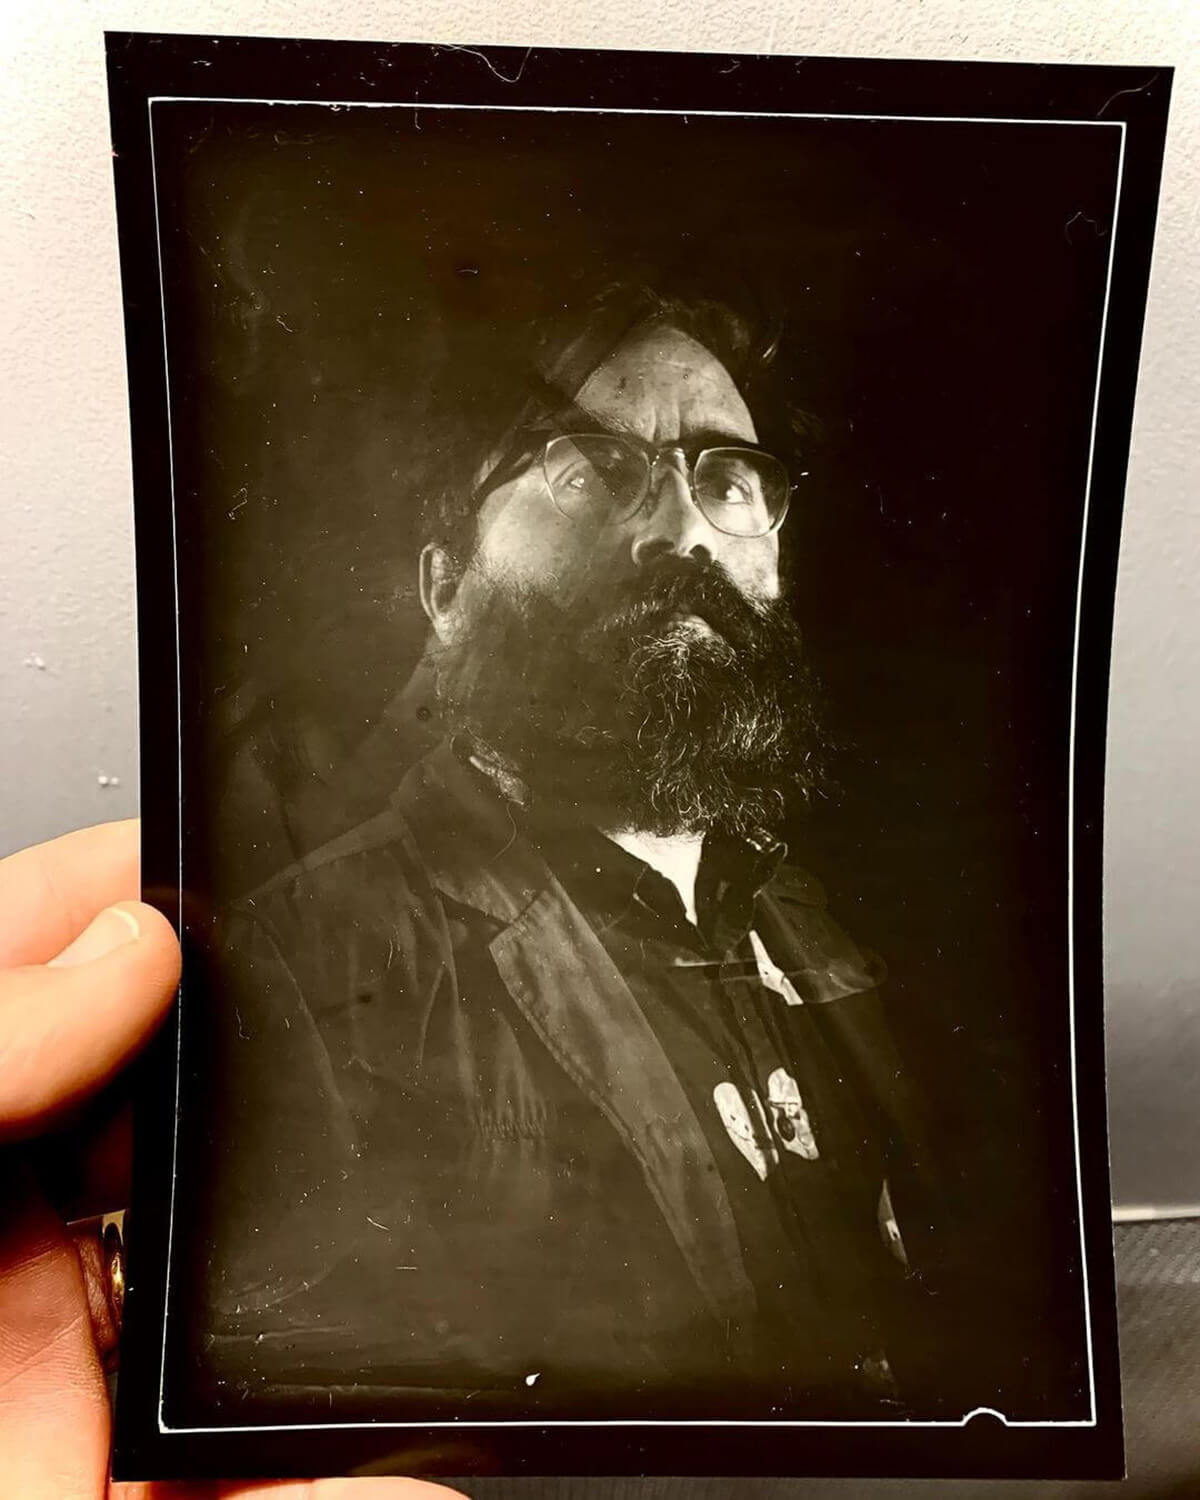 A contact print from my first glass plate, a selfie. At this point I was still getting significant light leaks in the 3d printed holders